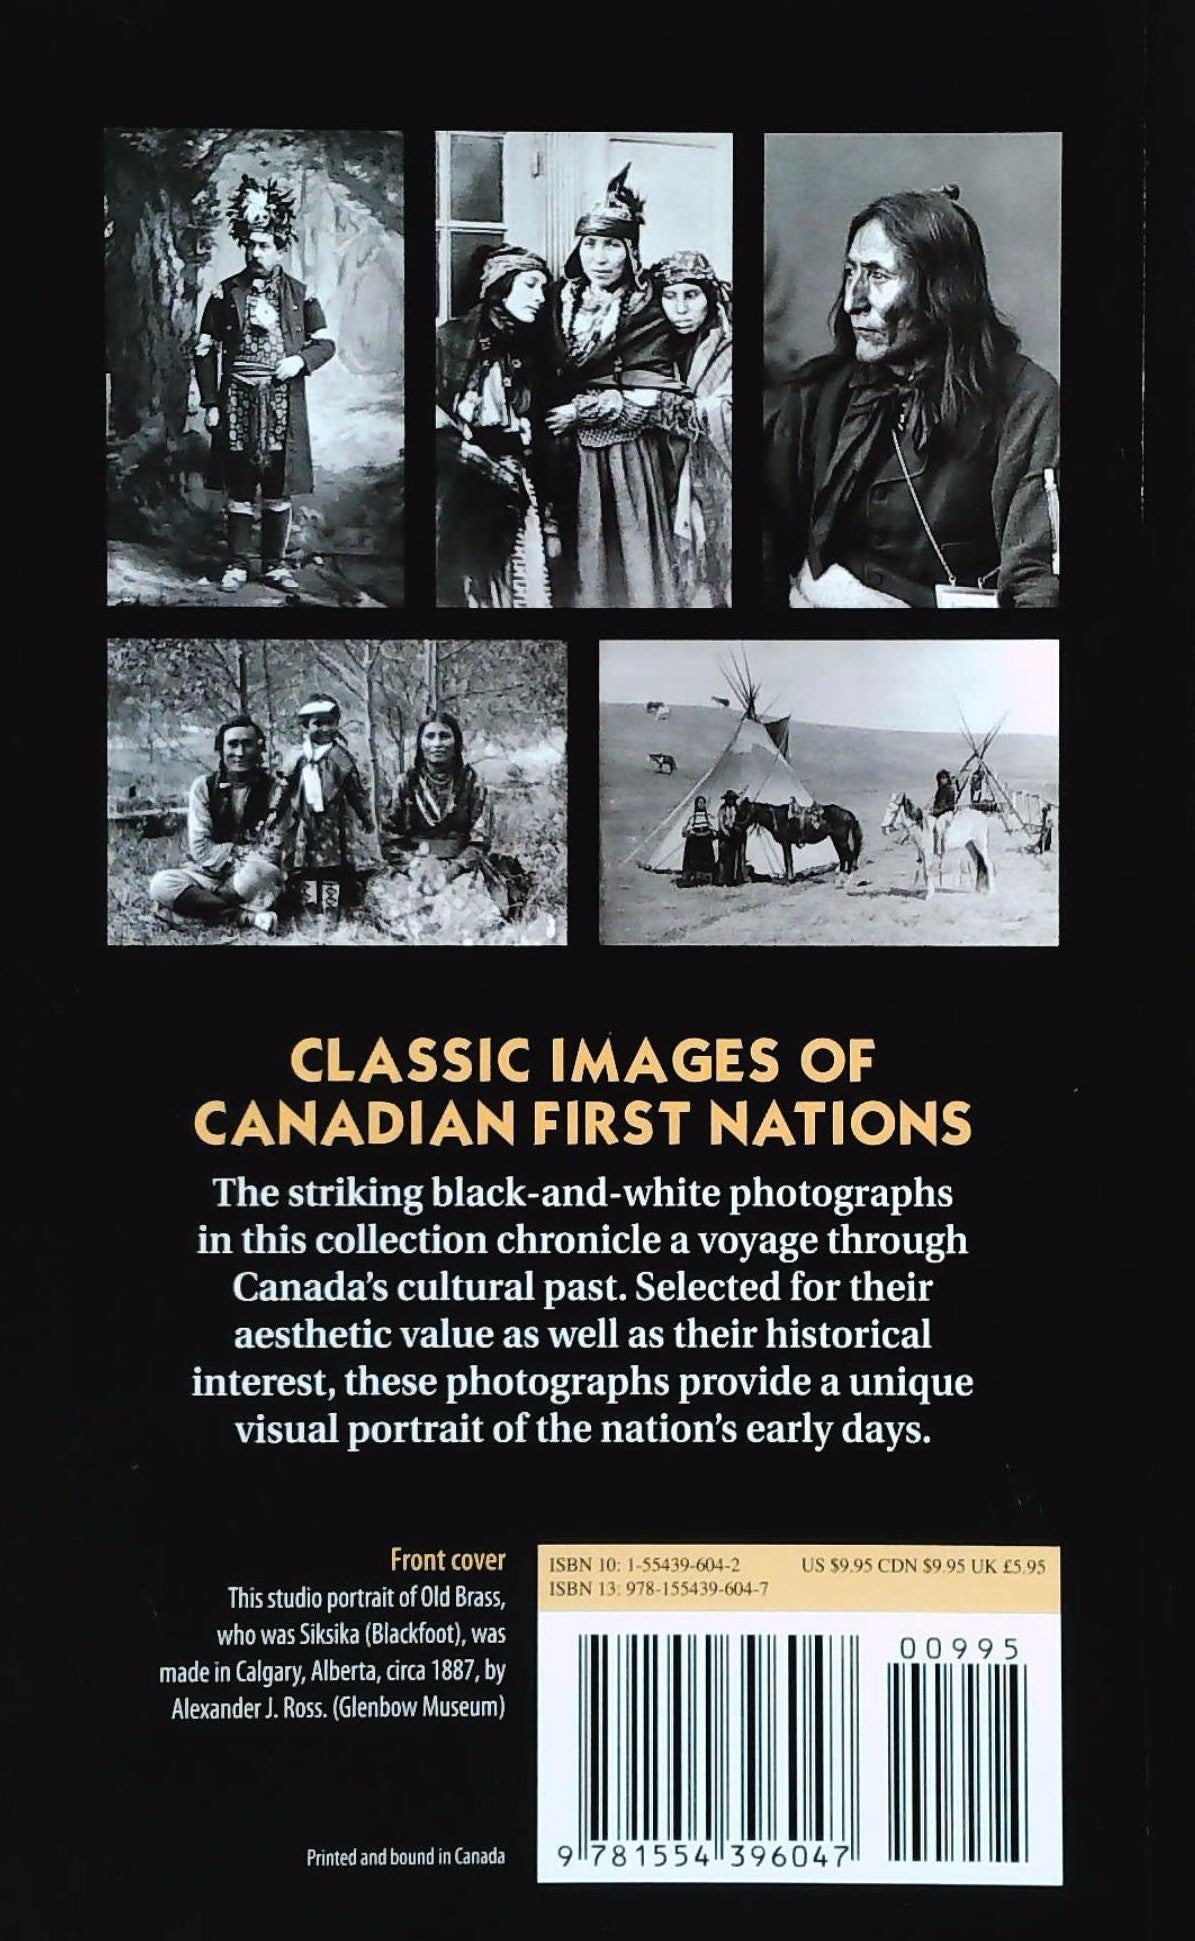 Classic Images of Canadian First Nations (Edward Cavell)